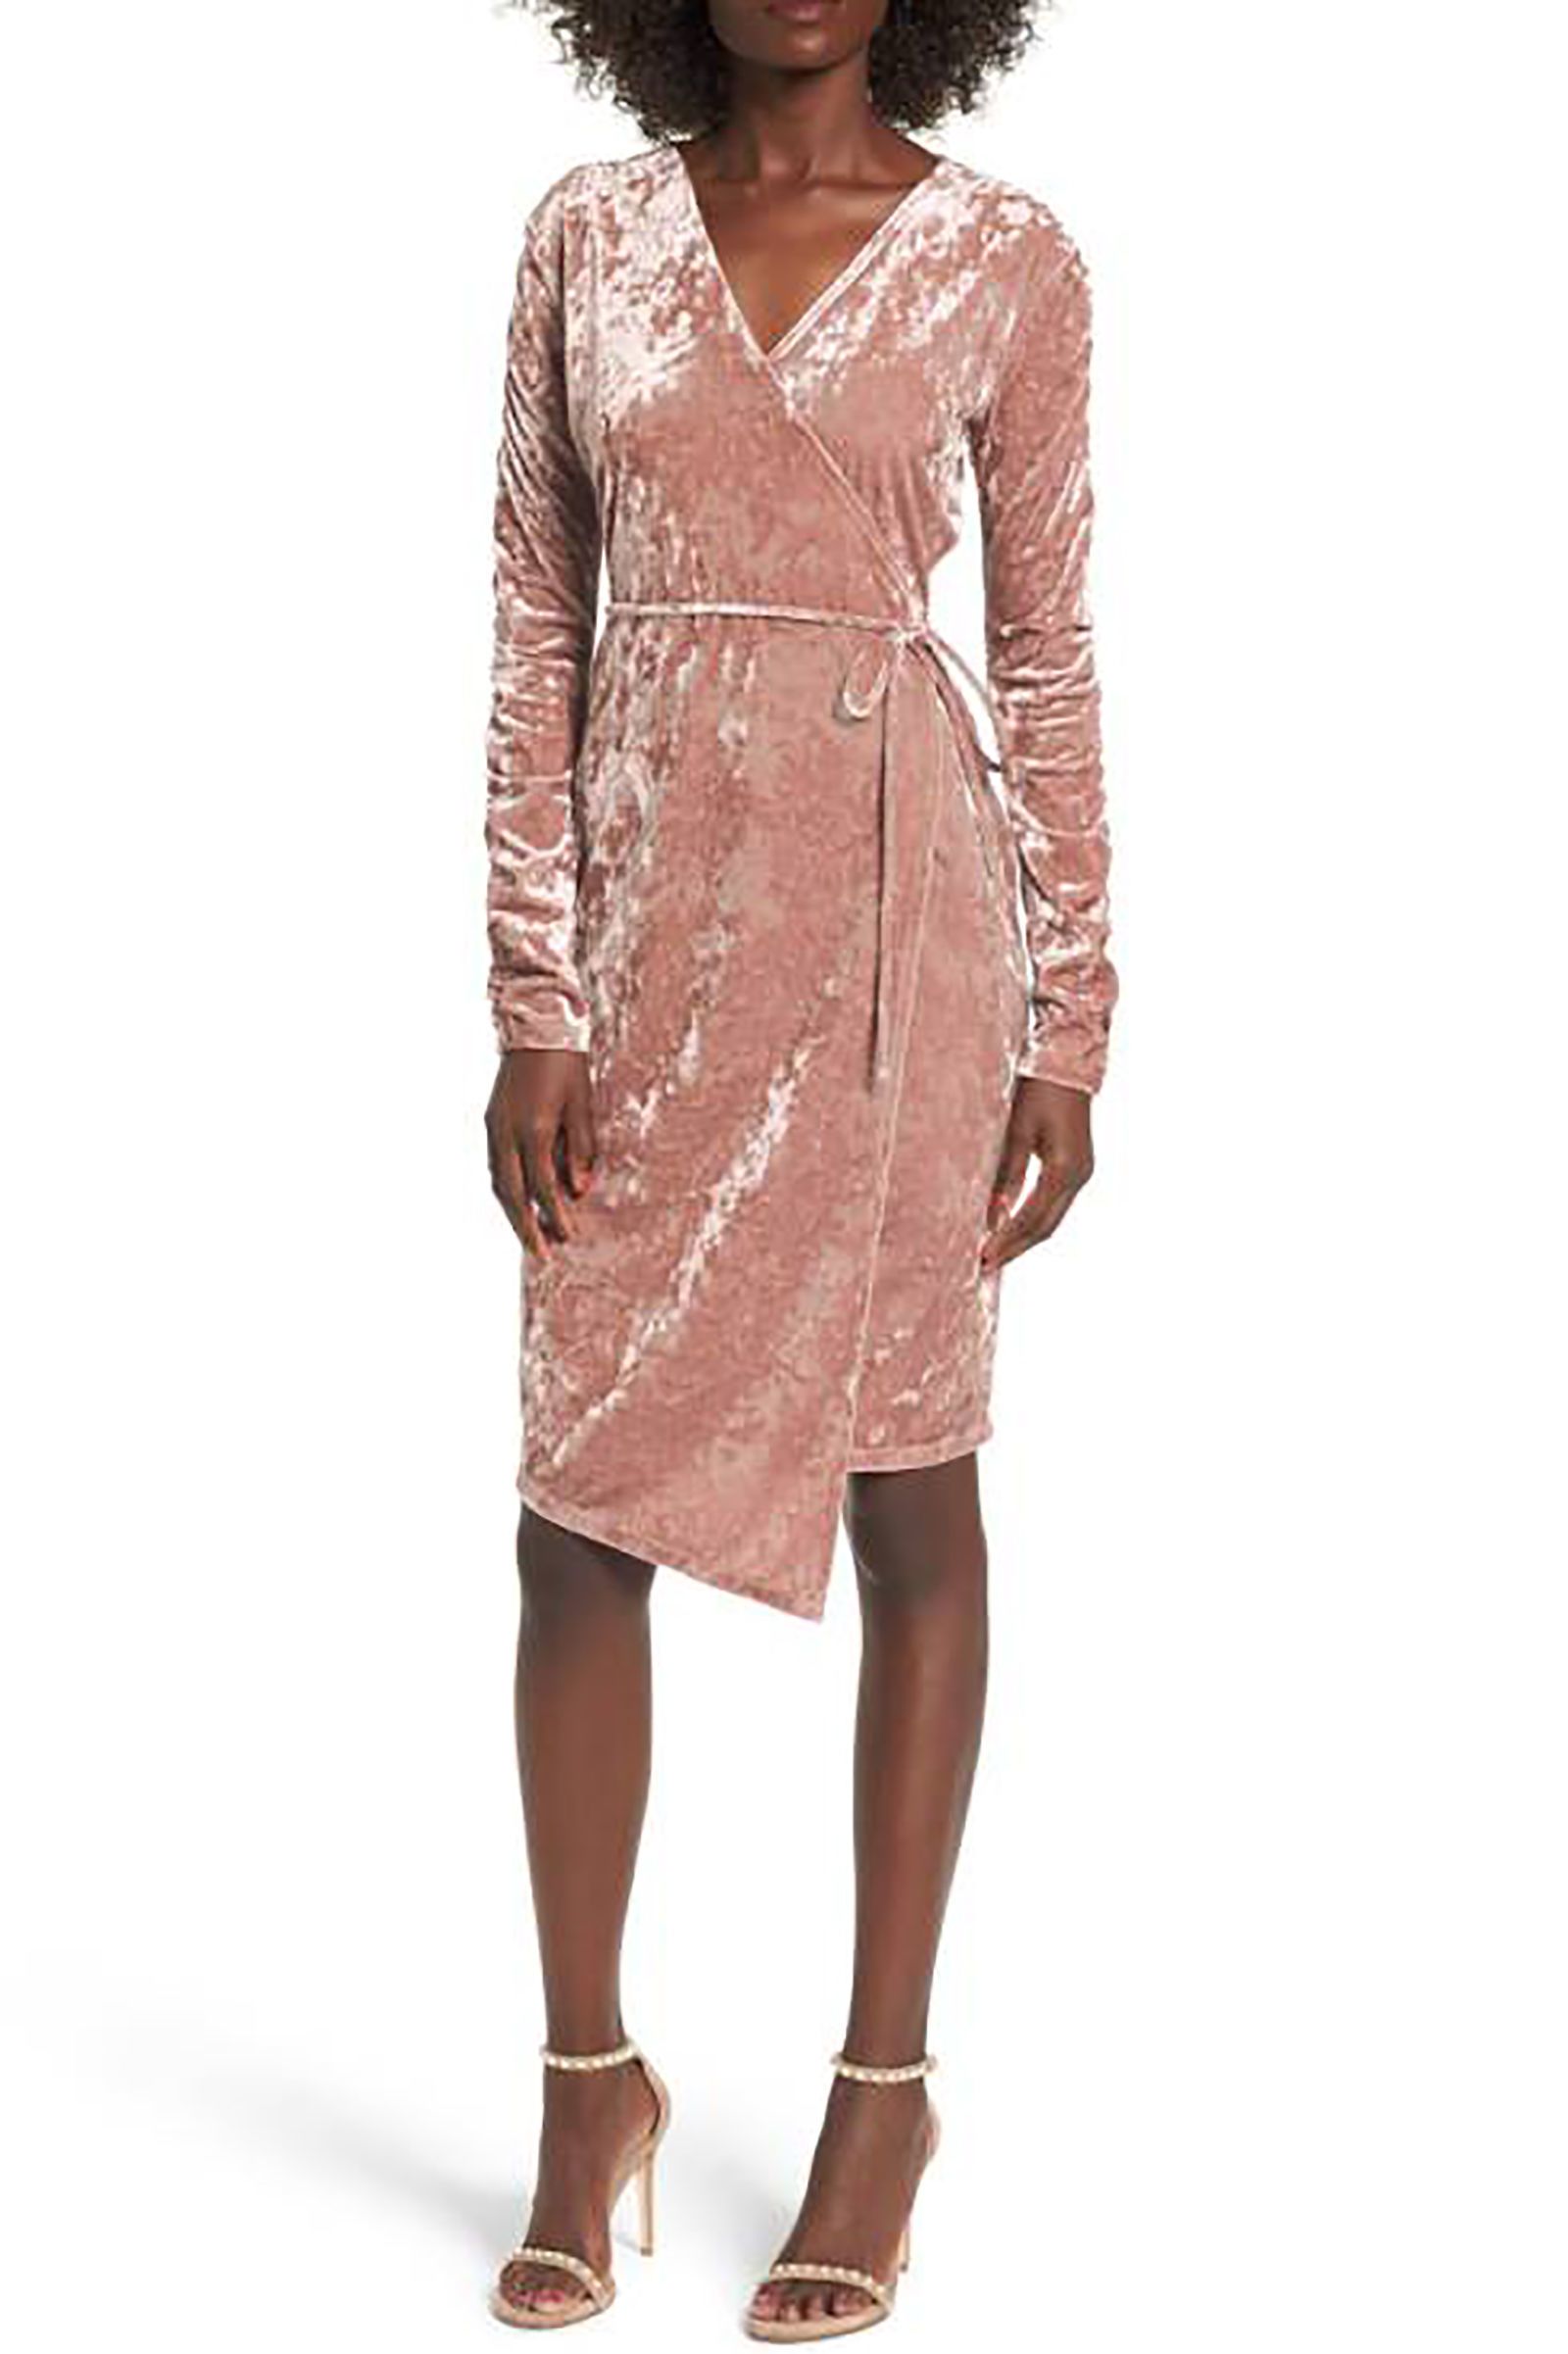 Macy's New Year Dresses Outlet Shop, UP TO 68% OFF |  www.editorialelpirata.com